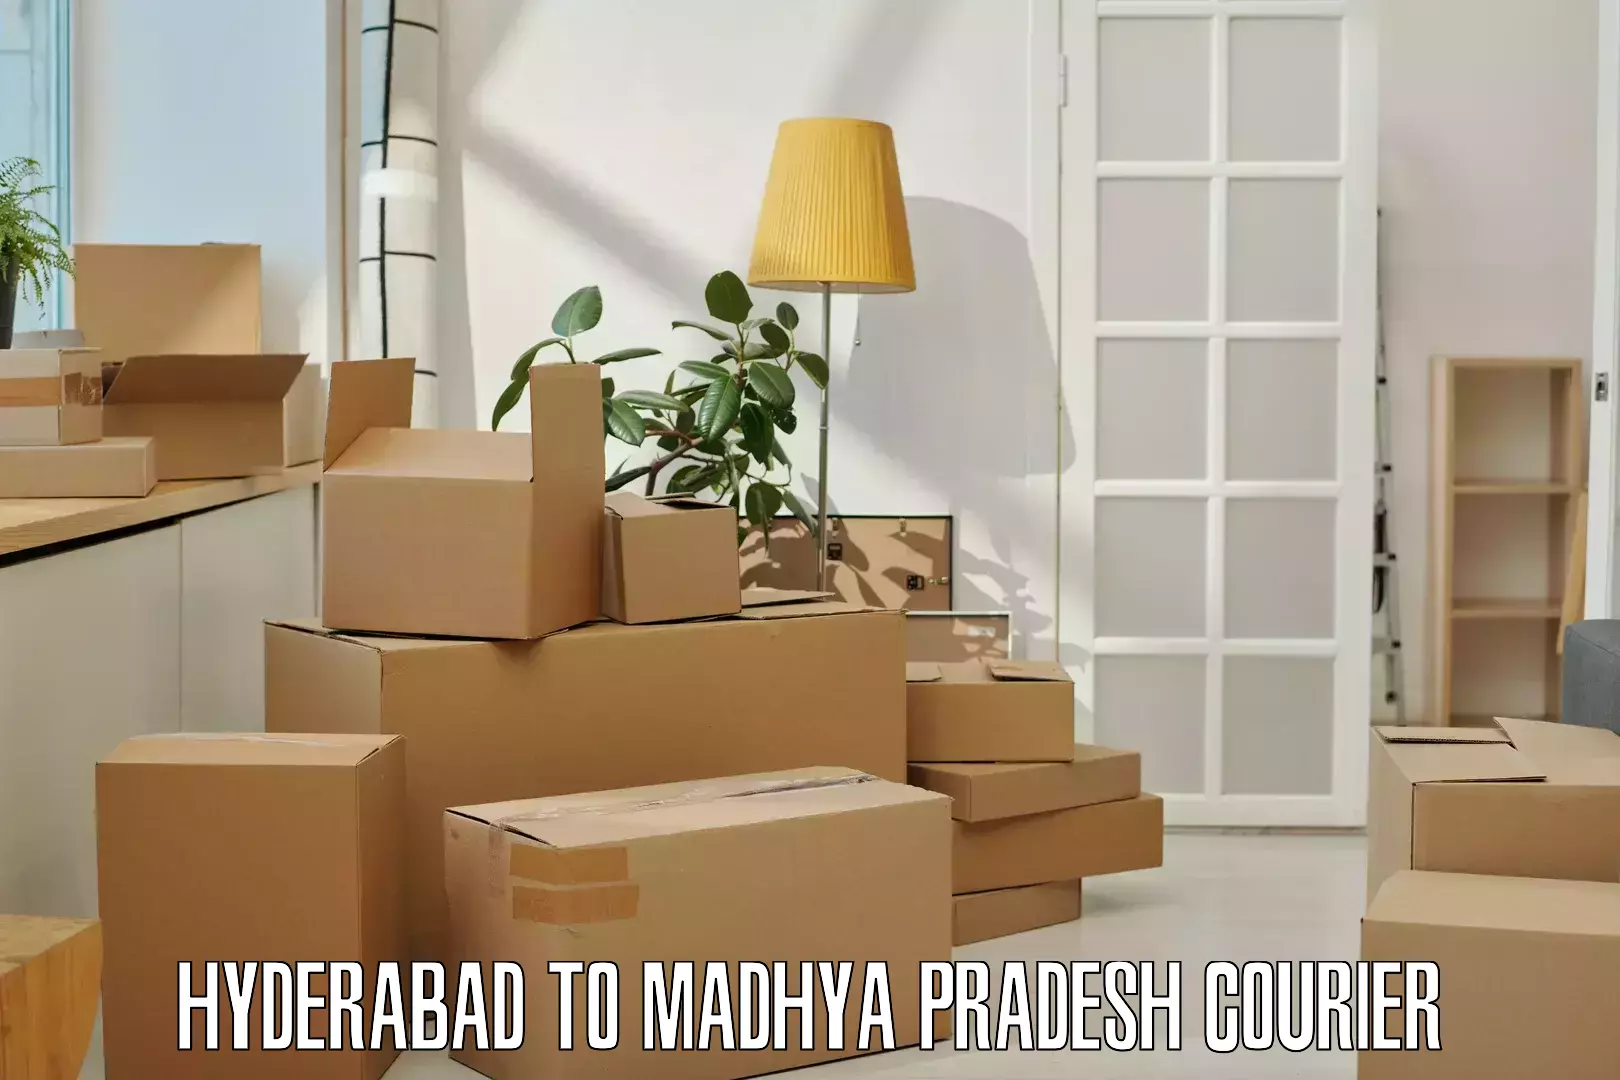 Full-service courier options Hyderabad to Gwalior